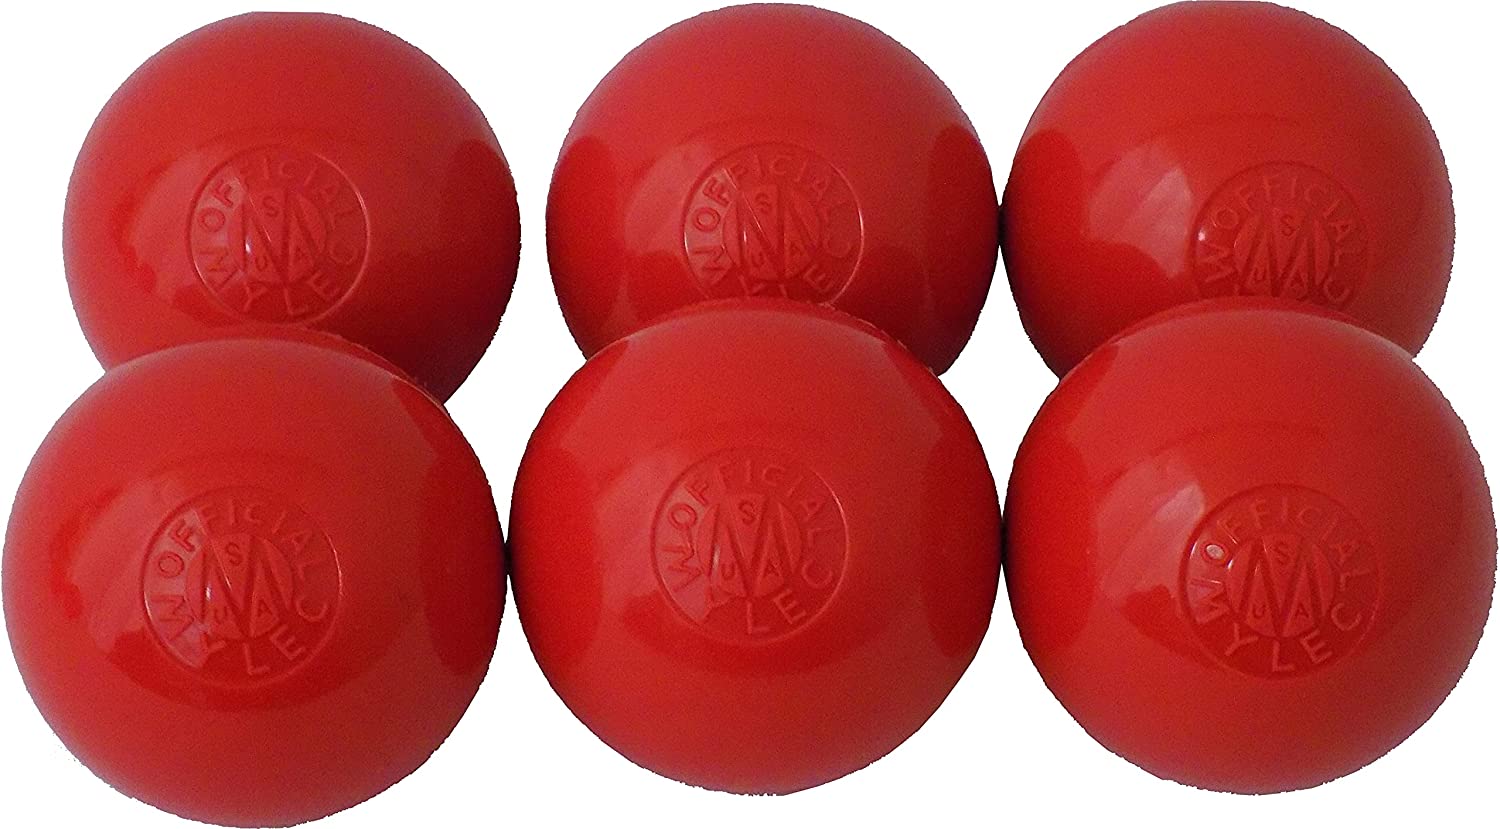 Mylec Original No Bounce Hockey Ball - Red - Hot 75° and Over - 6 Pack - Pro-Distributing